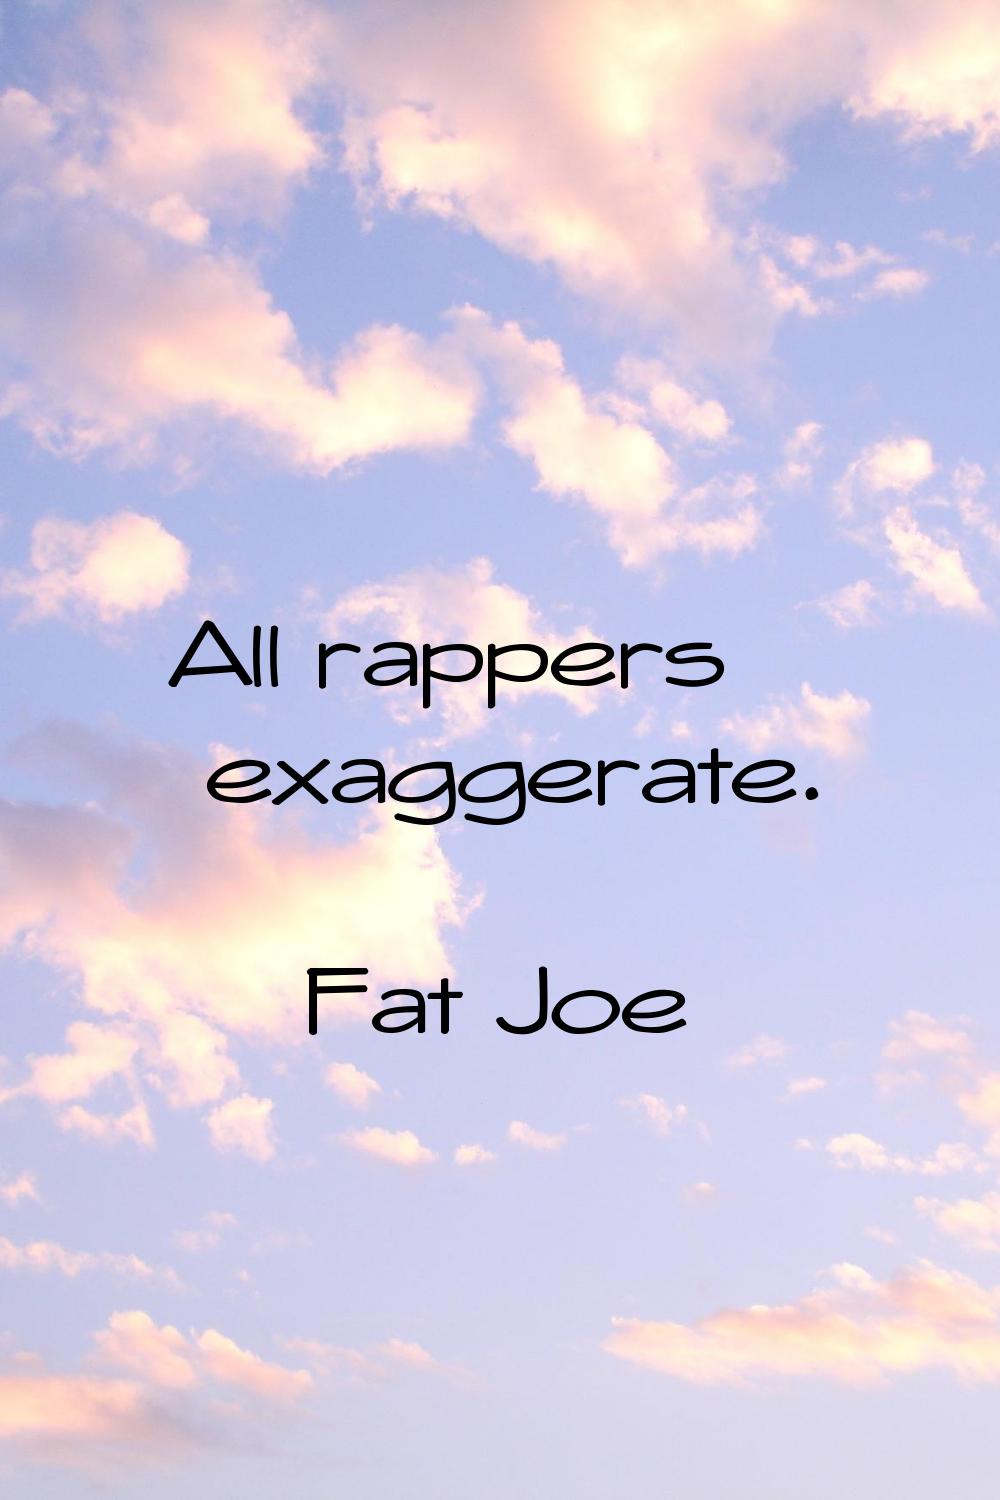 All rappers exaggerate.